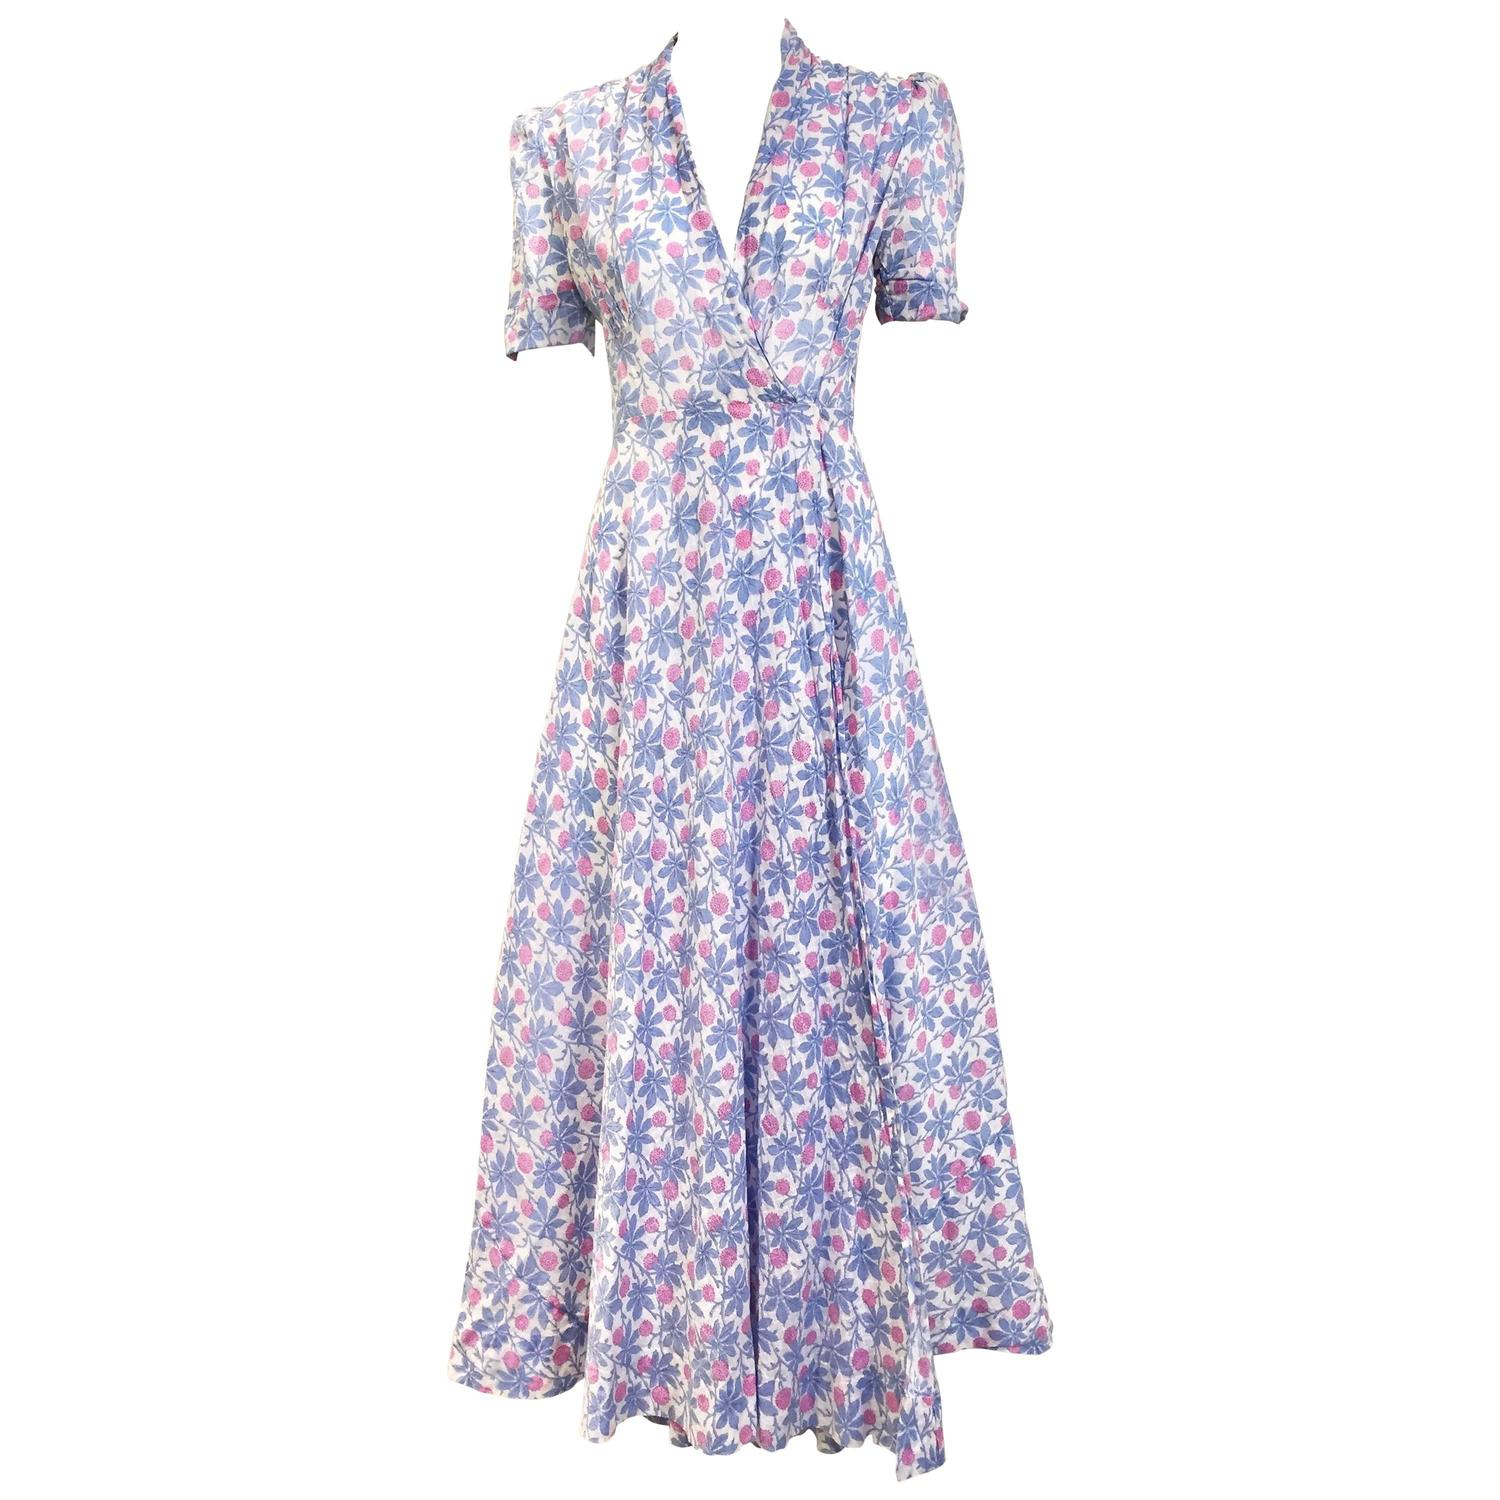 1930s floral print cotton wrap dress For Sale at 1stdibs